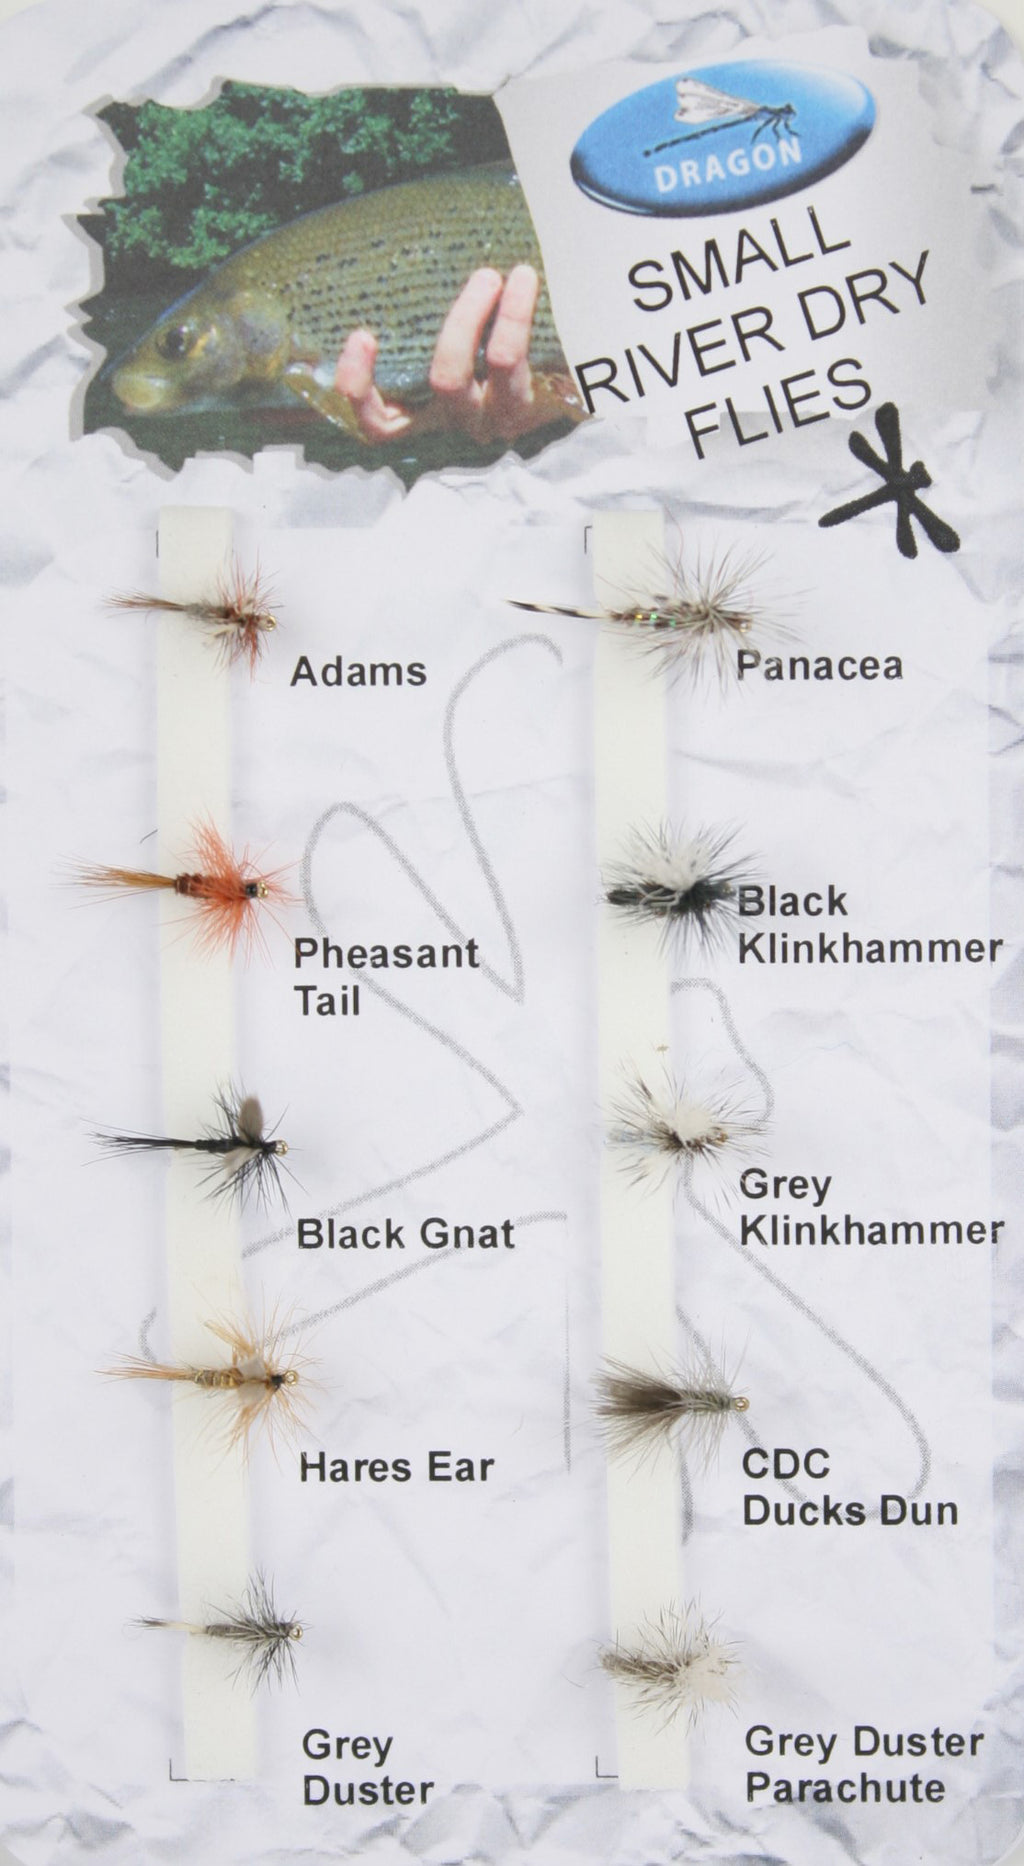 Dragon Dry Fly Assorted Selection - 10 Pack - OpenSeason.ie Irish Online Fishing Tackle Shop - Nenagh, Co. Tipperary